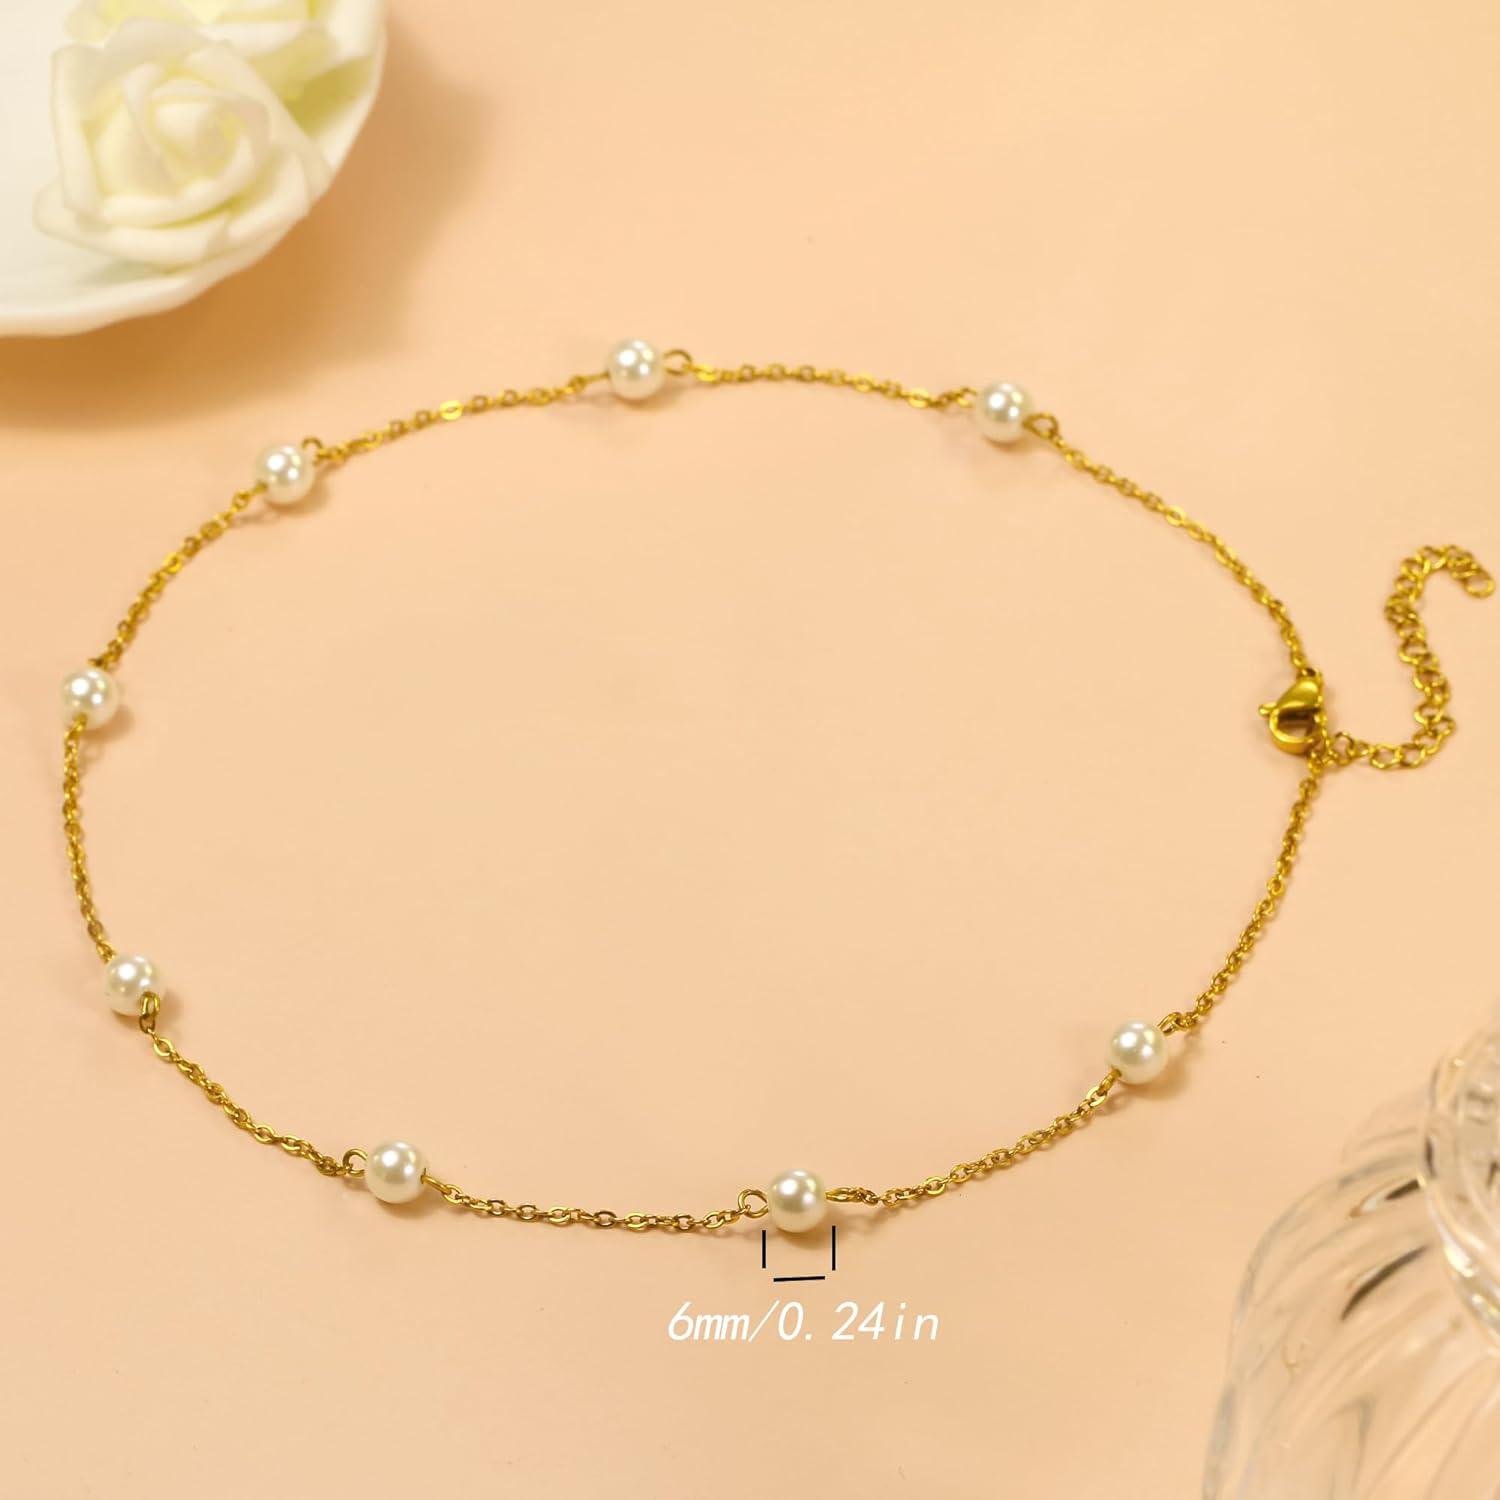 Trinckle Gold Pearl Necklace, Dainty Gold Necklaces Pearl Choker Necklace 15'' Pearl Necklaces for Women Valentines Day Necklace Adjustable Gold Jewelry for Bride as Girls Pearl Jewelry Birthday Gift